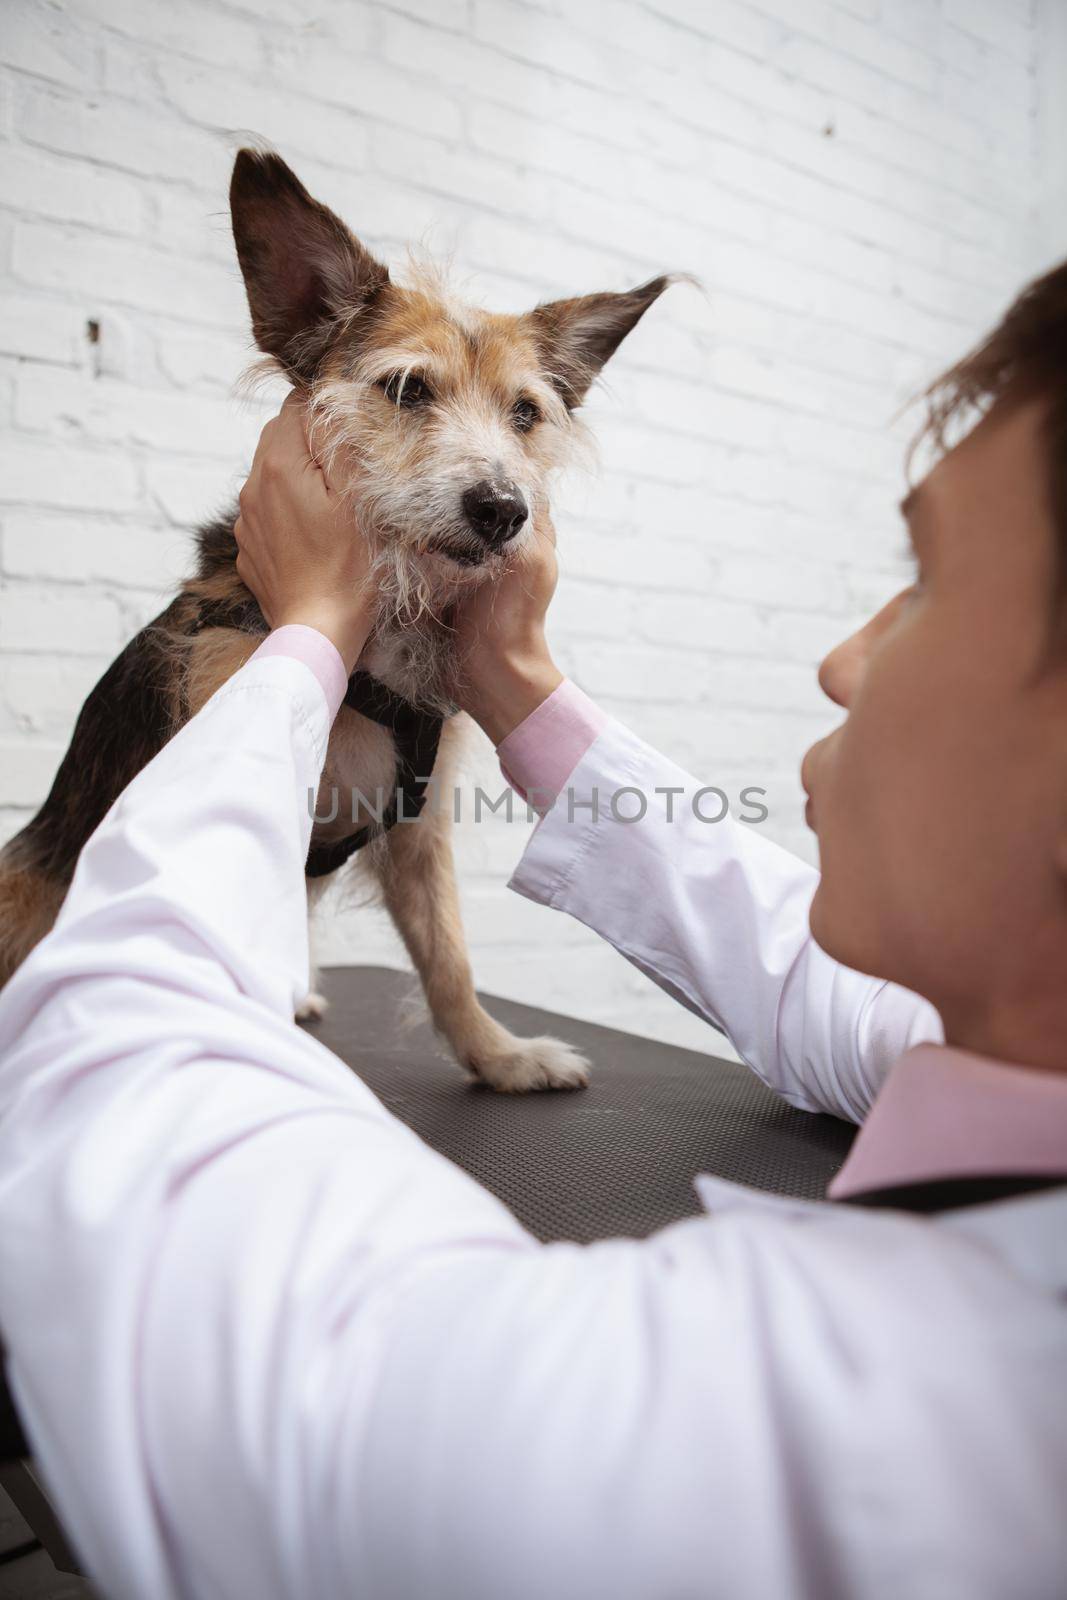 Vertical low angle shot of a cute fluffy dog examined by male veterinarian